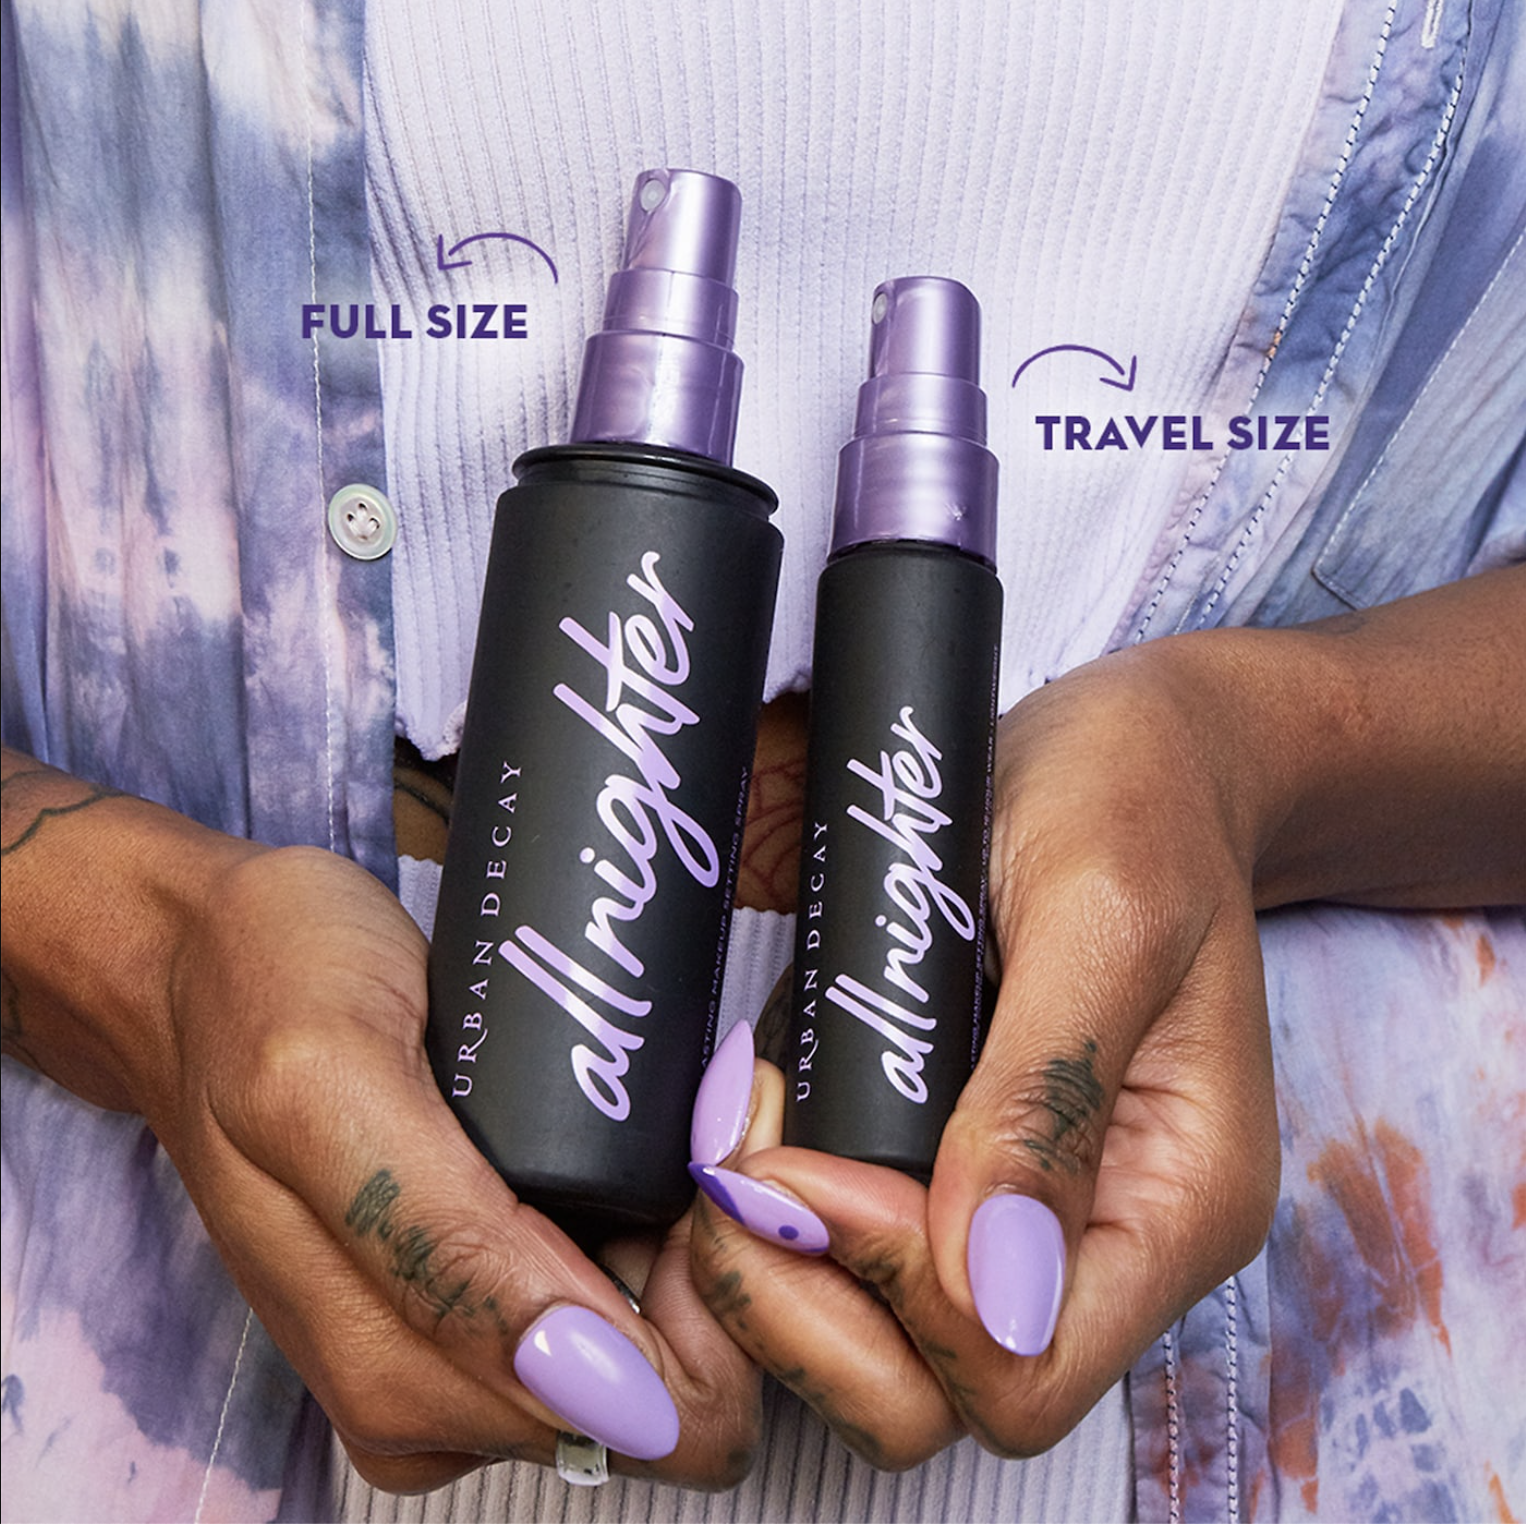 A person holding two bottles of the setting spray